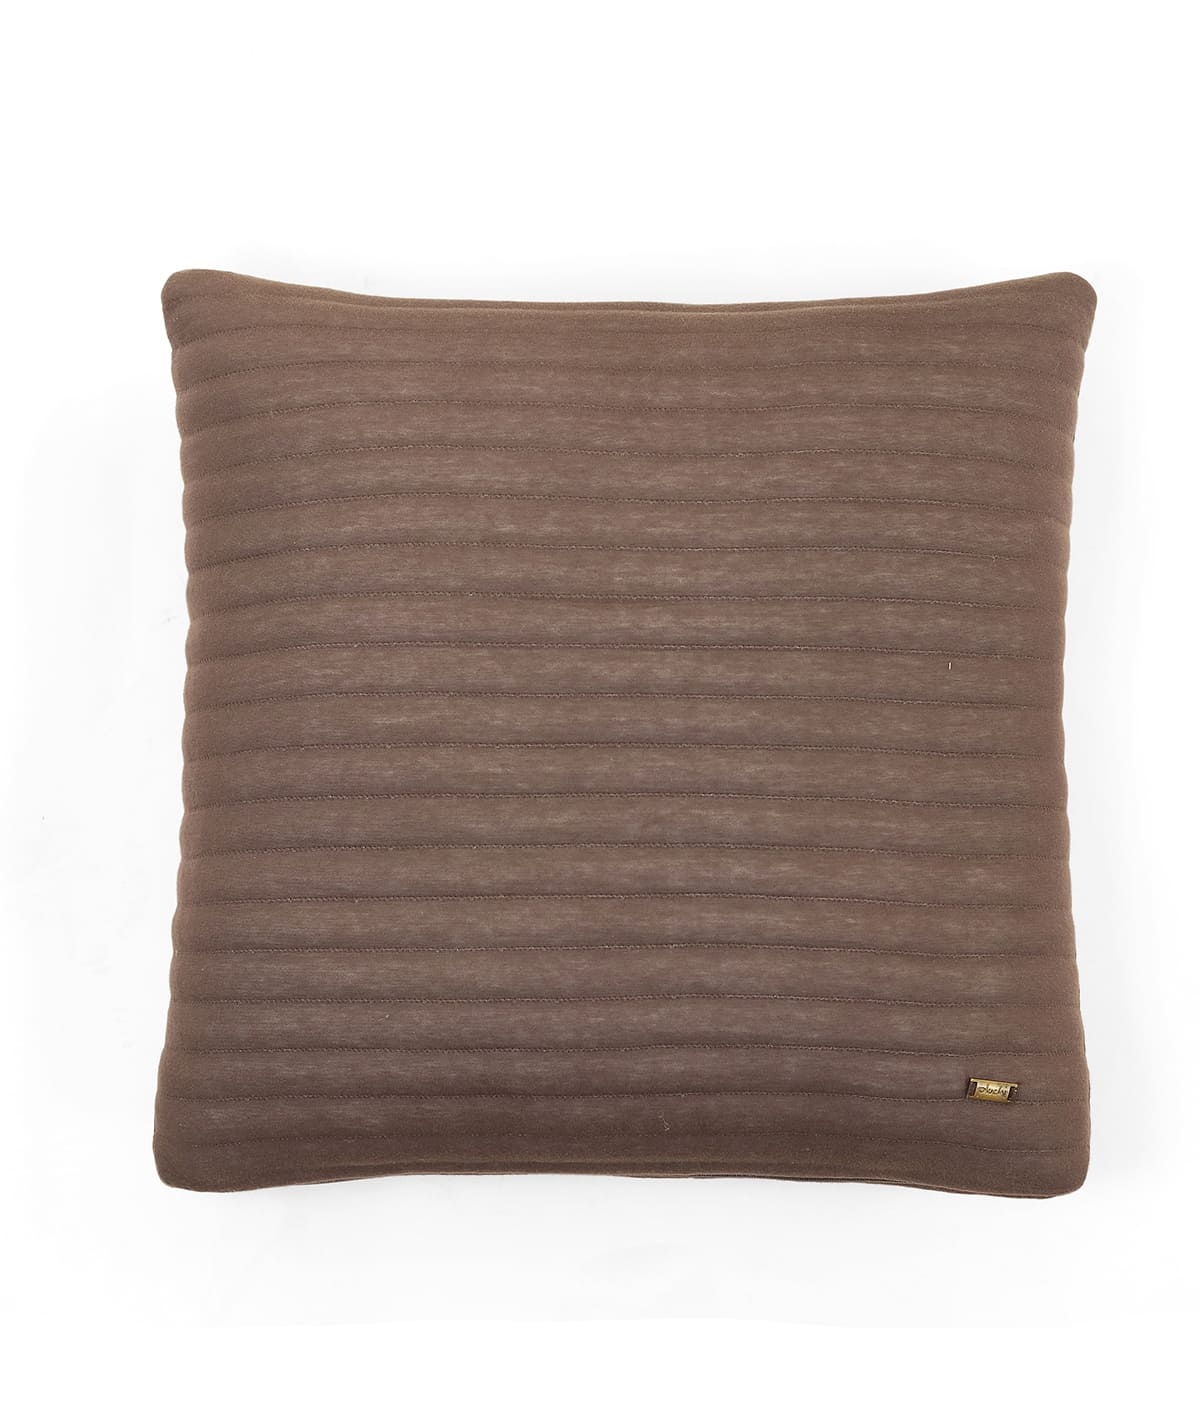 Waseme Brown Cotton Knitted Quilted Decorative 18 X 18 Inches Cushion Cover